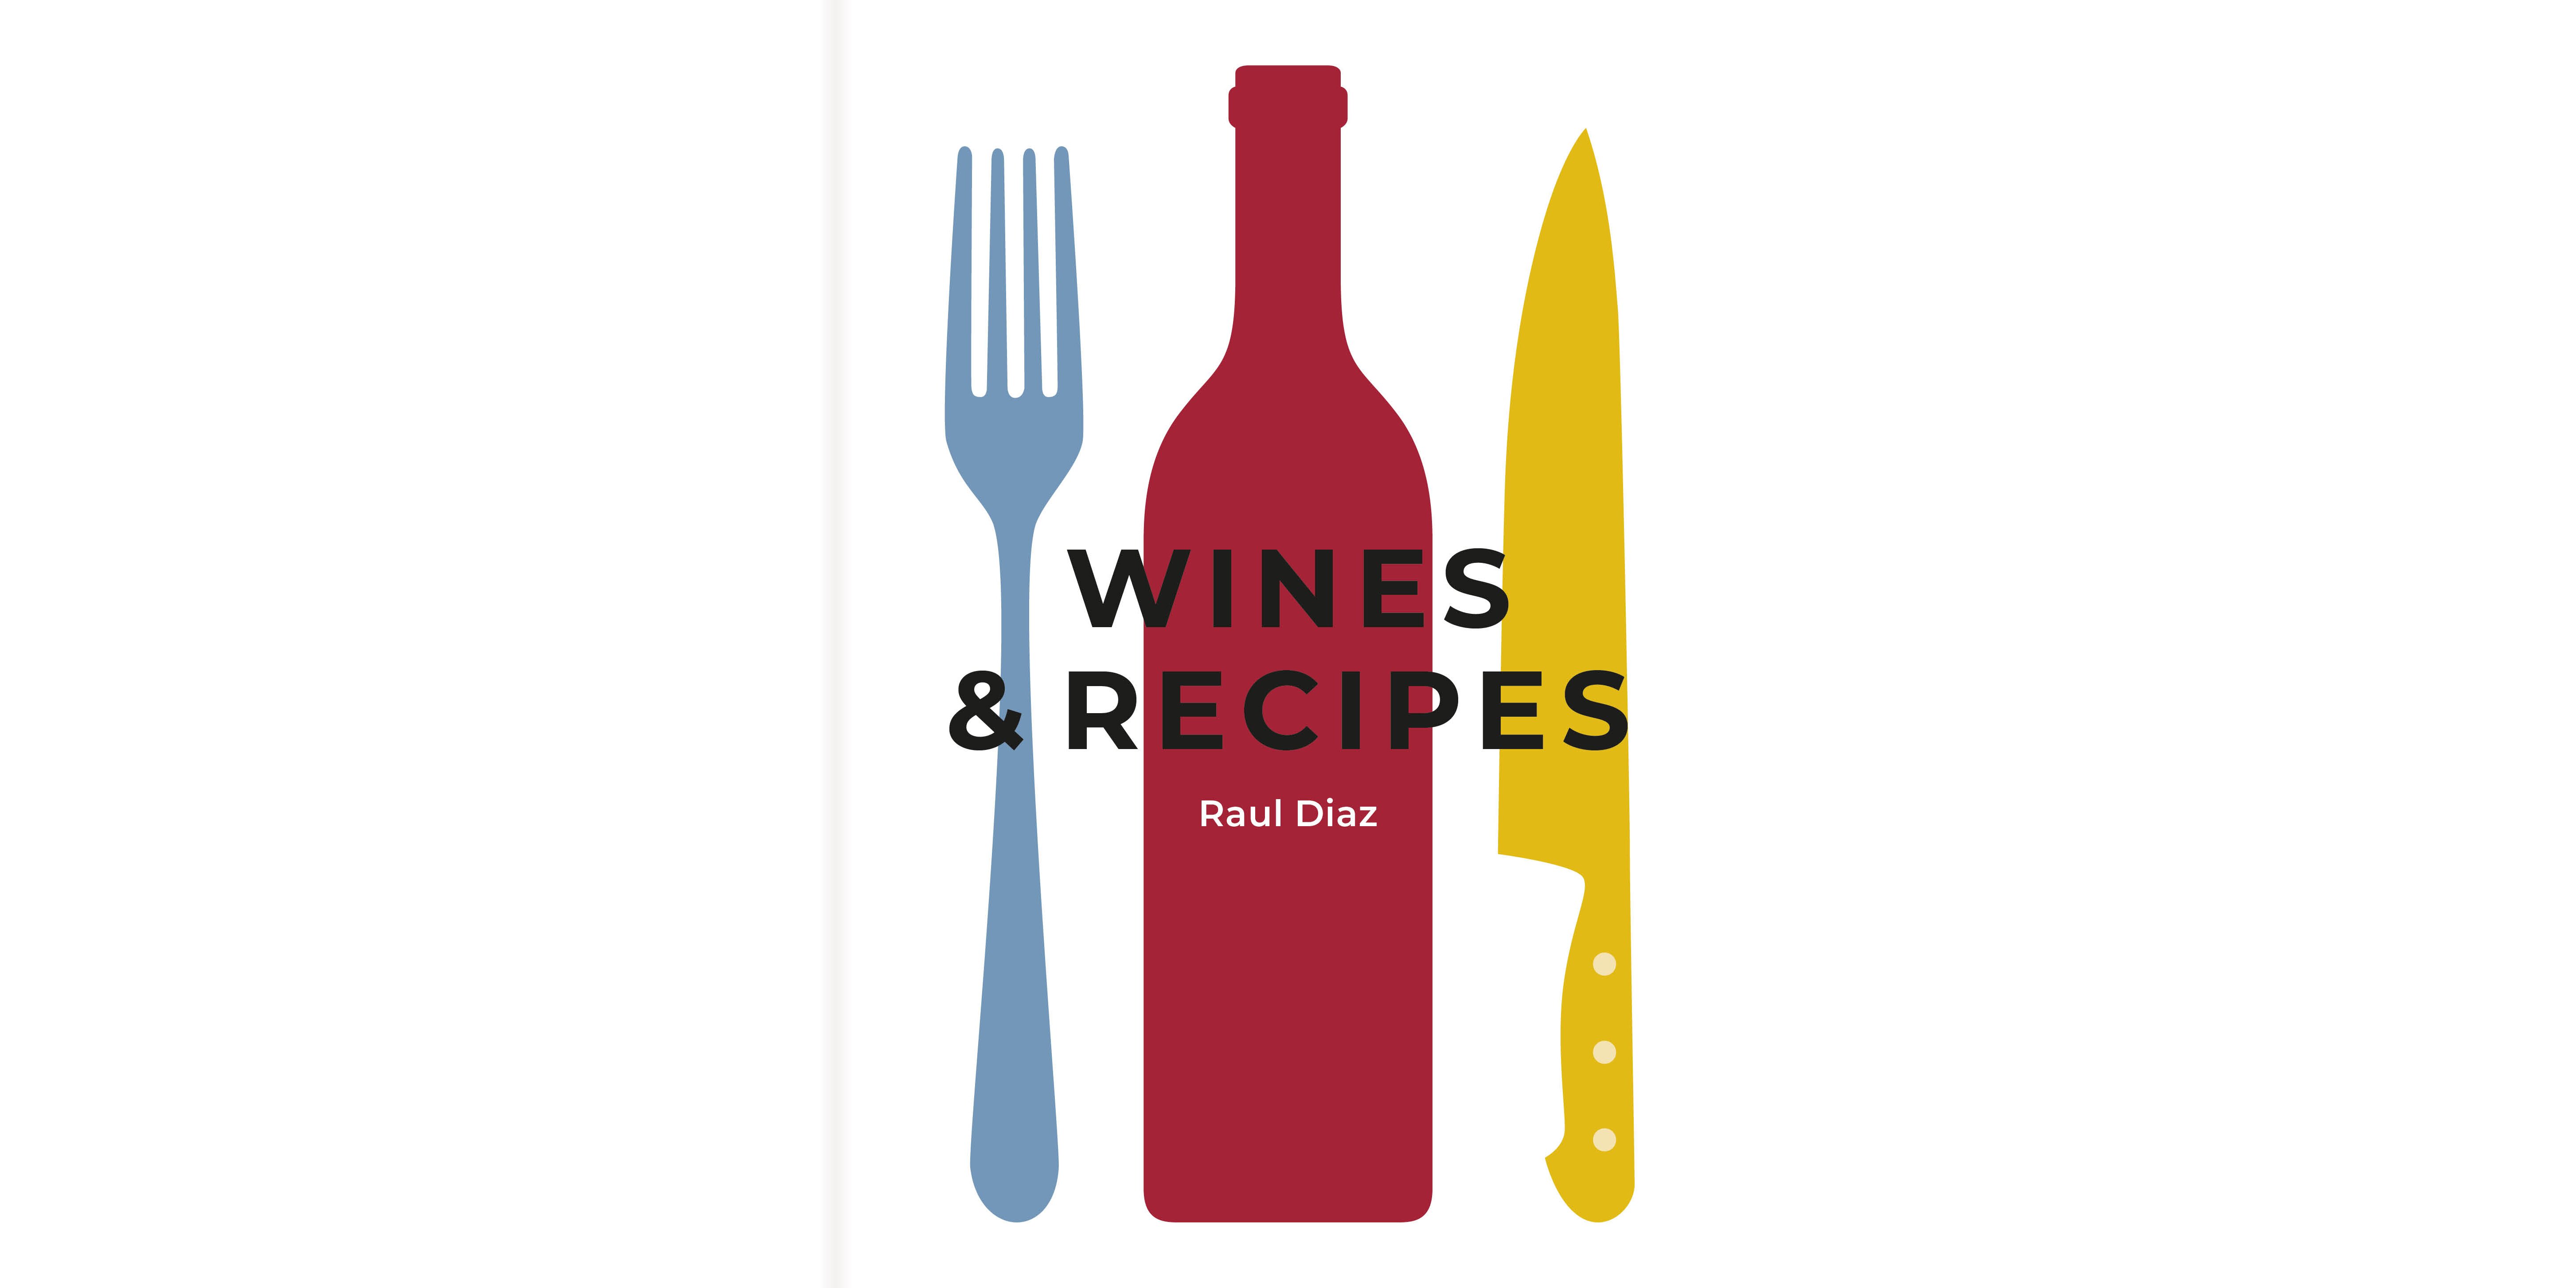 Book review: Wines & Recipes, by Raul Diaz